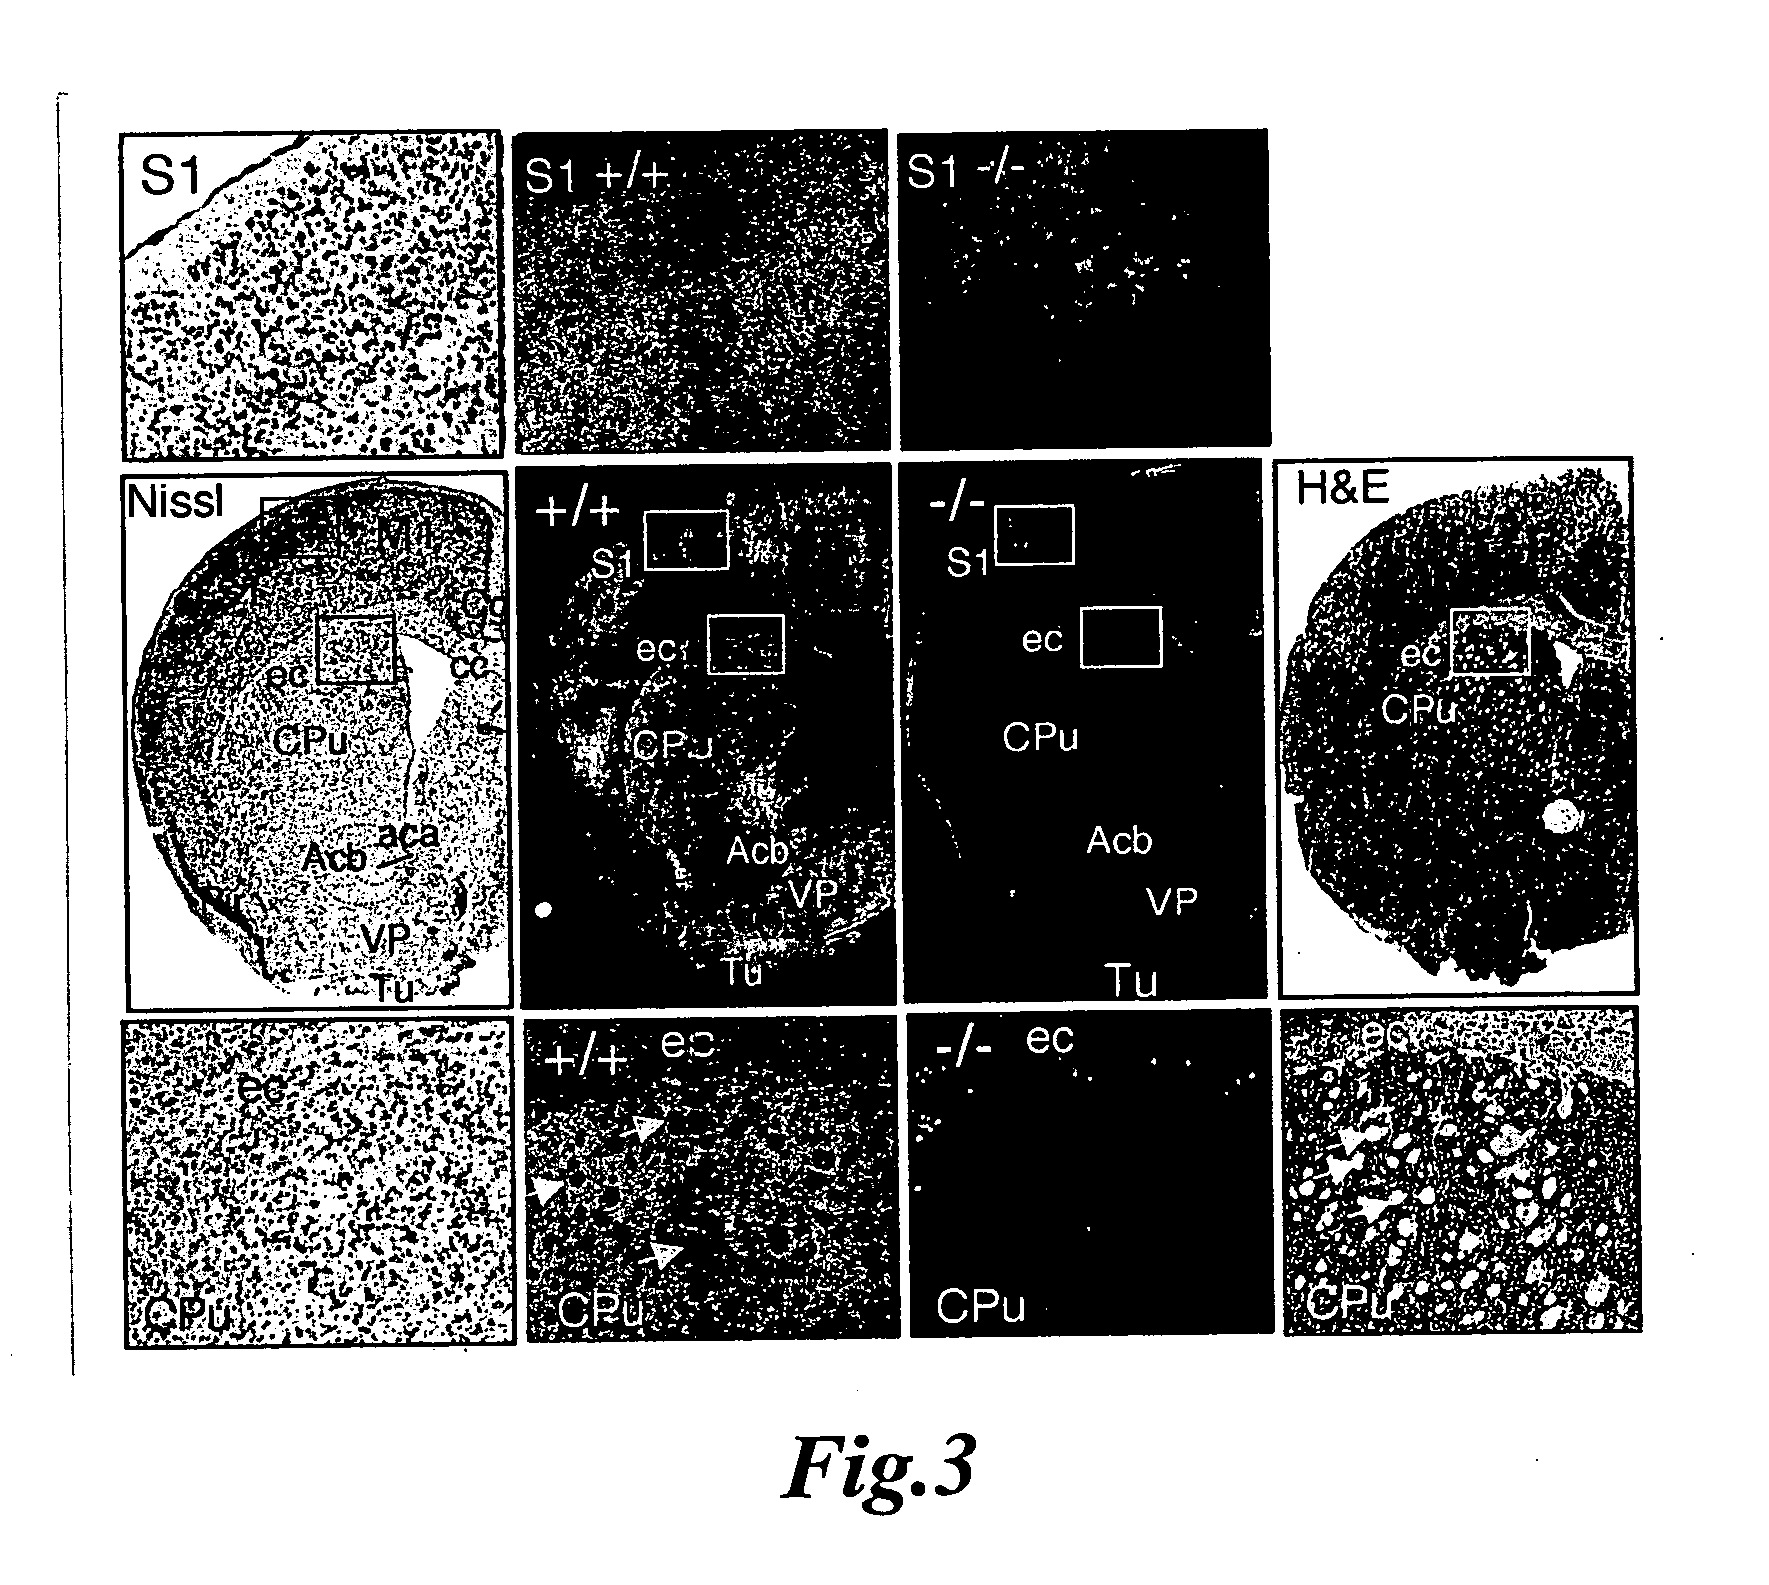 Novel compositions and methods for modulation of the acid-sensing ion channel (ASIC) for the treatment of anxiety and drug addiction